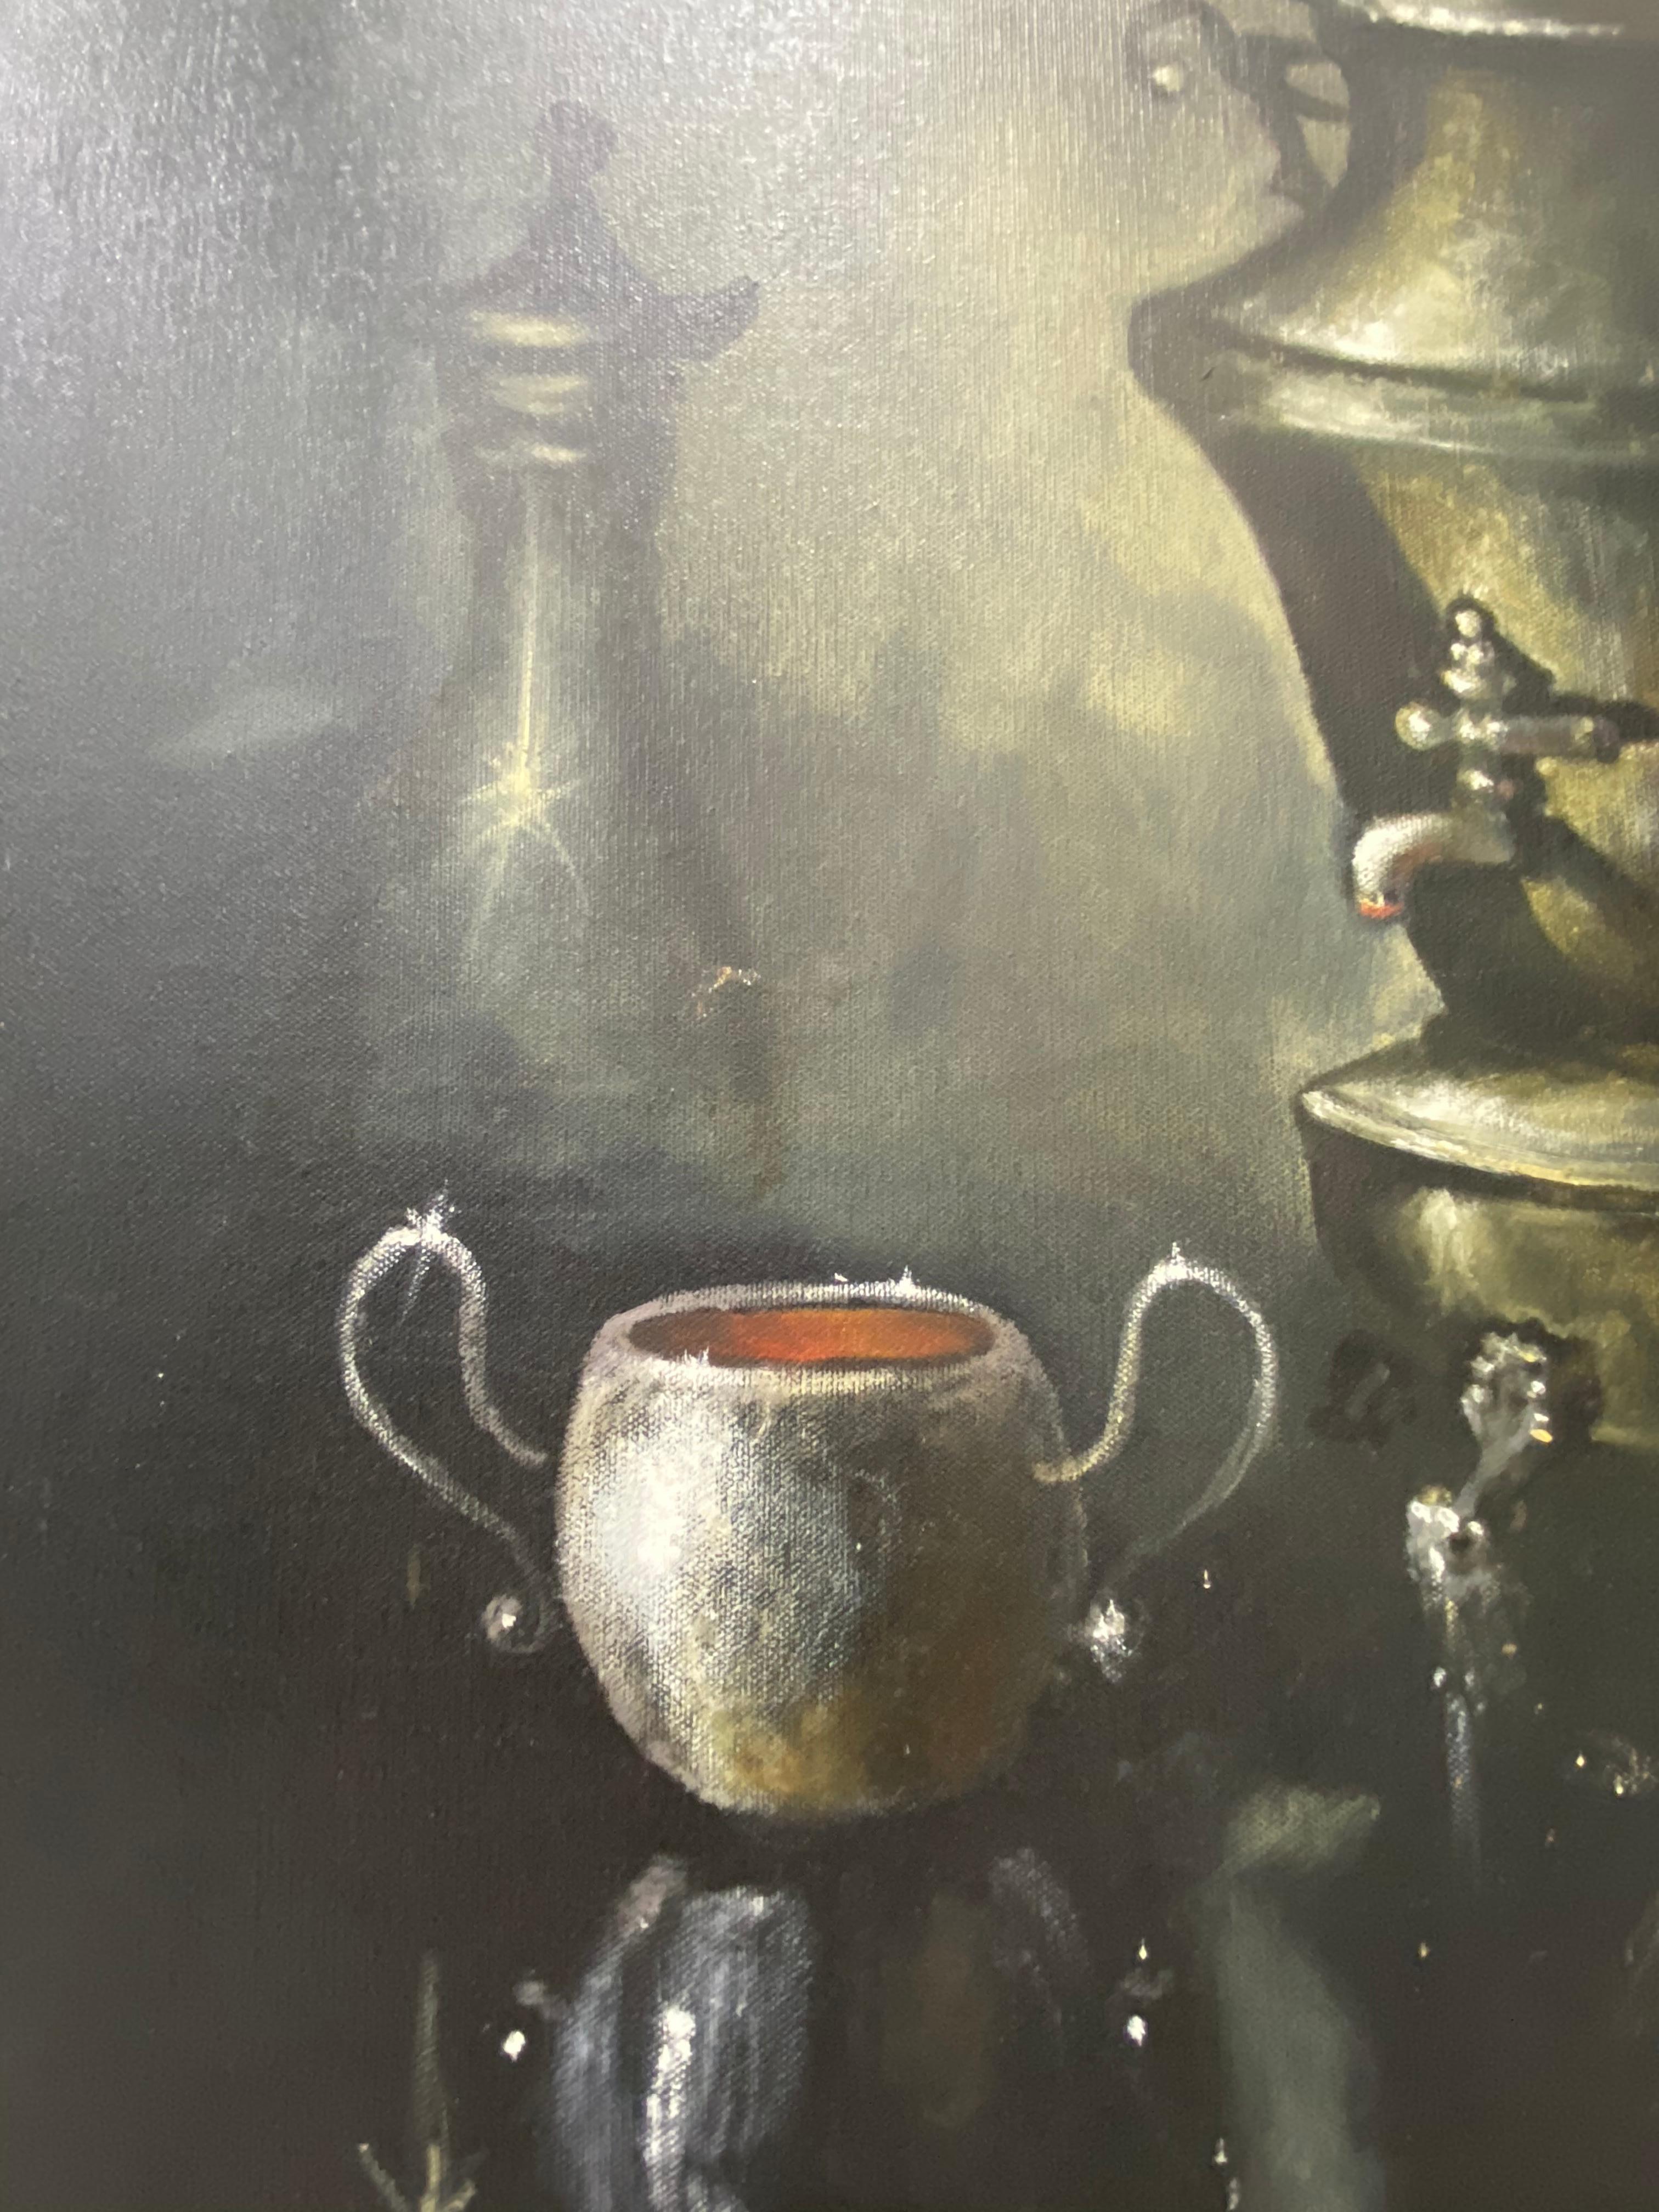 Vintage Original Still Life Oil Painting W/ Silver Coffee Chafer by Parisch C.1970

Original oil on canvas

Dimensions 22